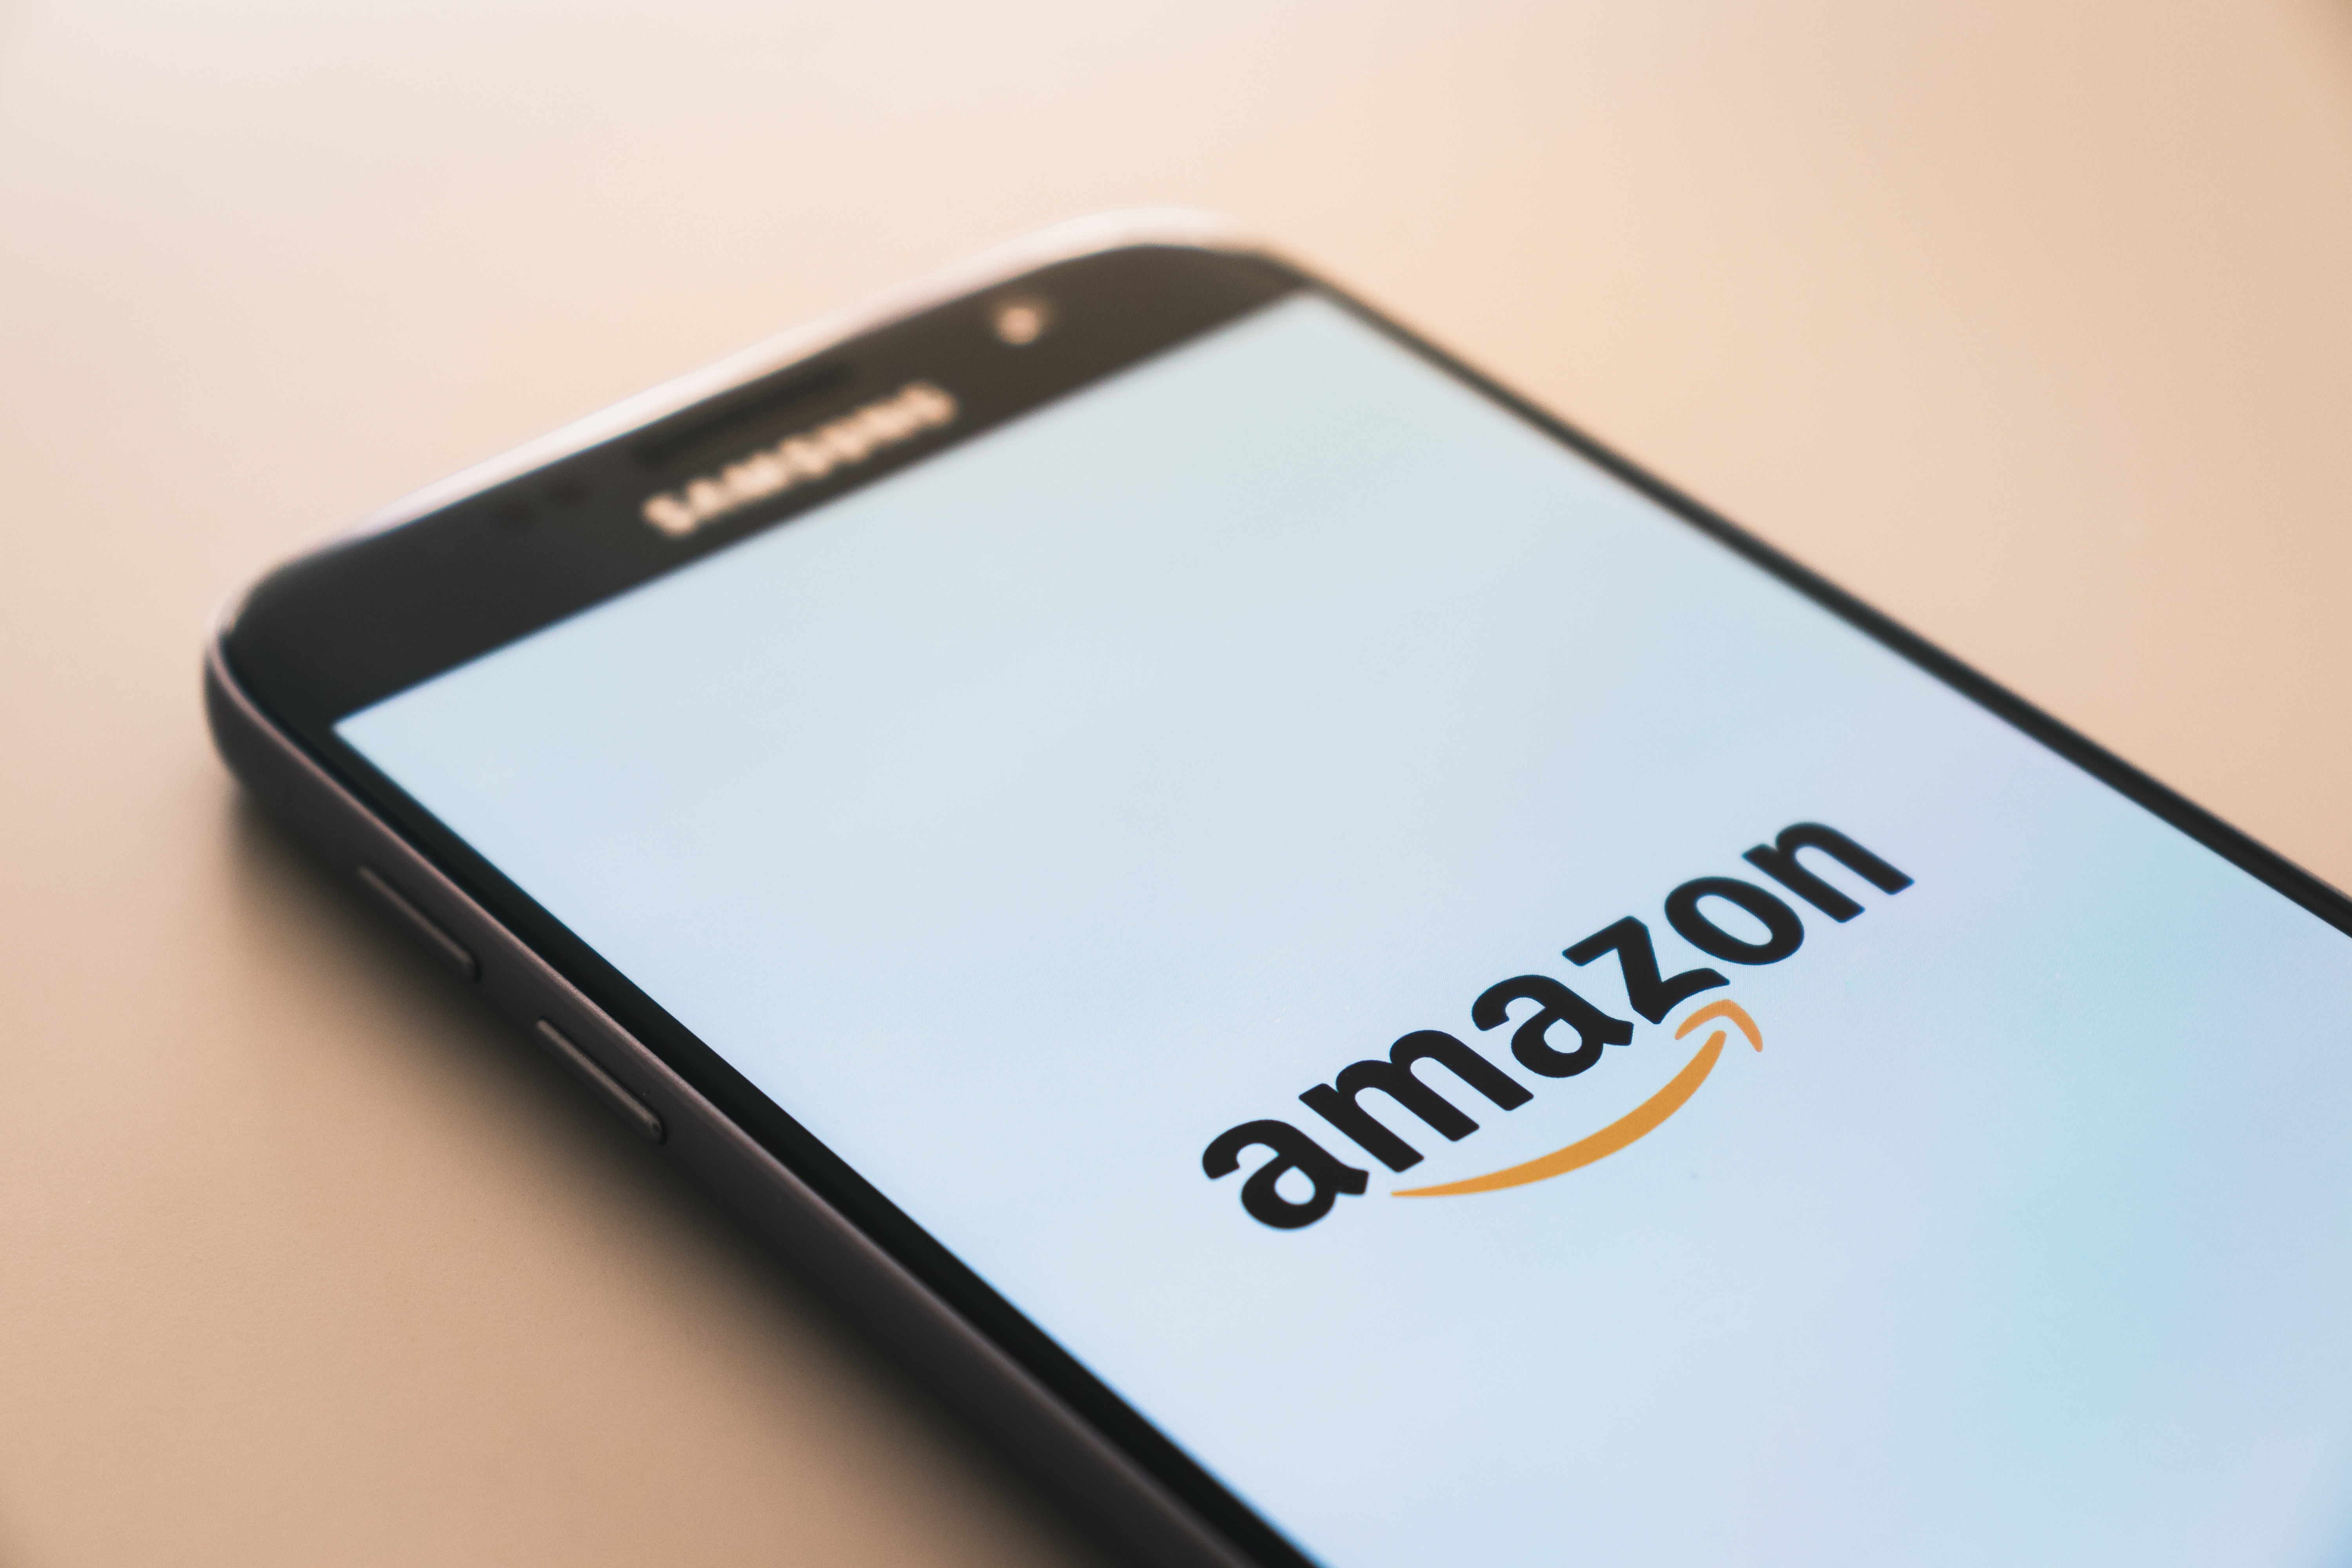 Amazon Prime Day Deal: Free $12.50 credit to Amazon with $50 gift card purchase